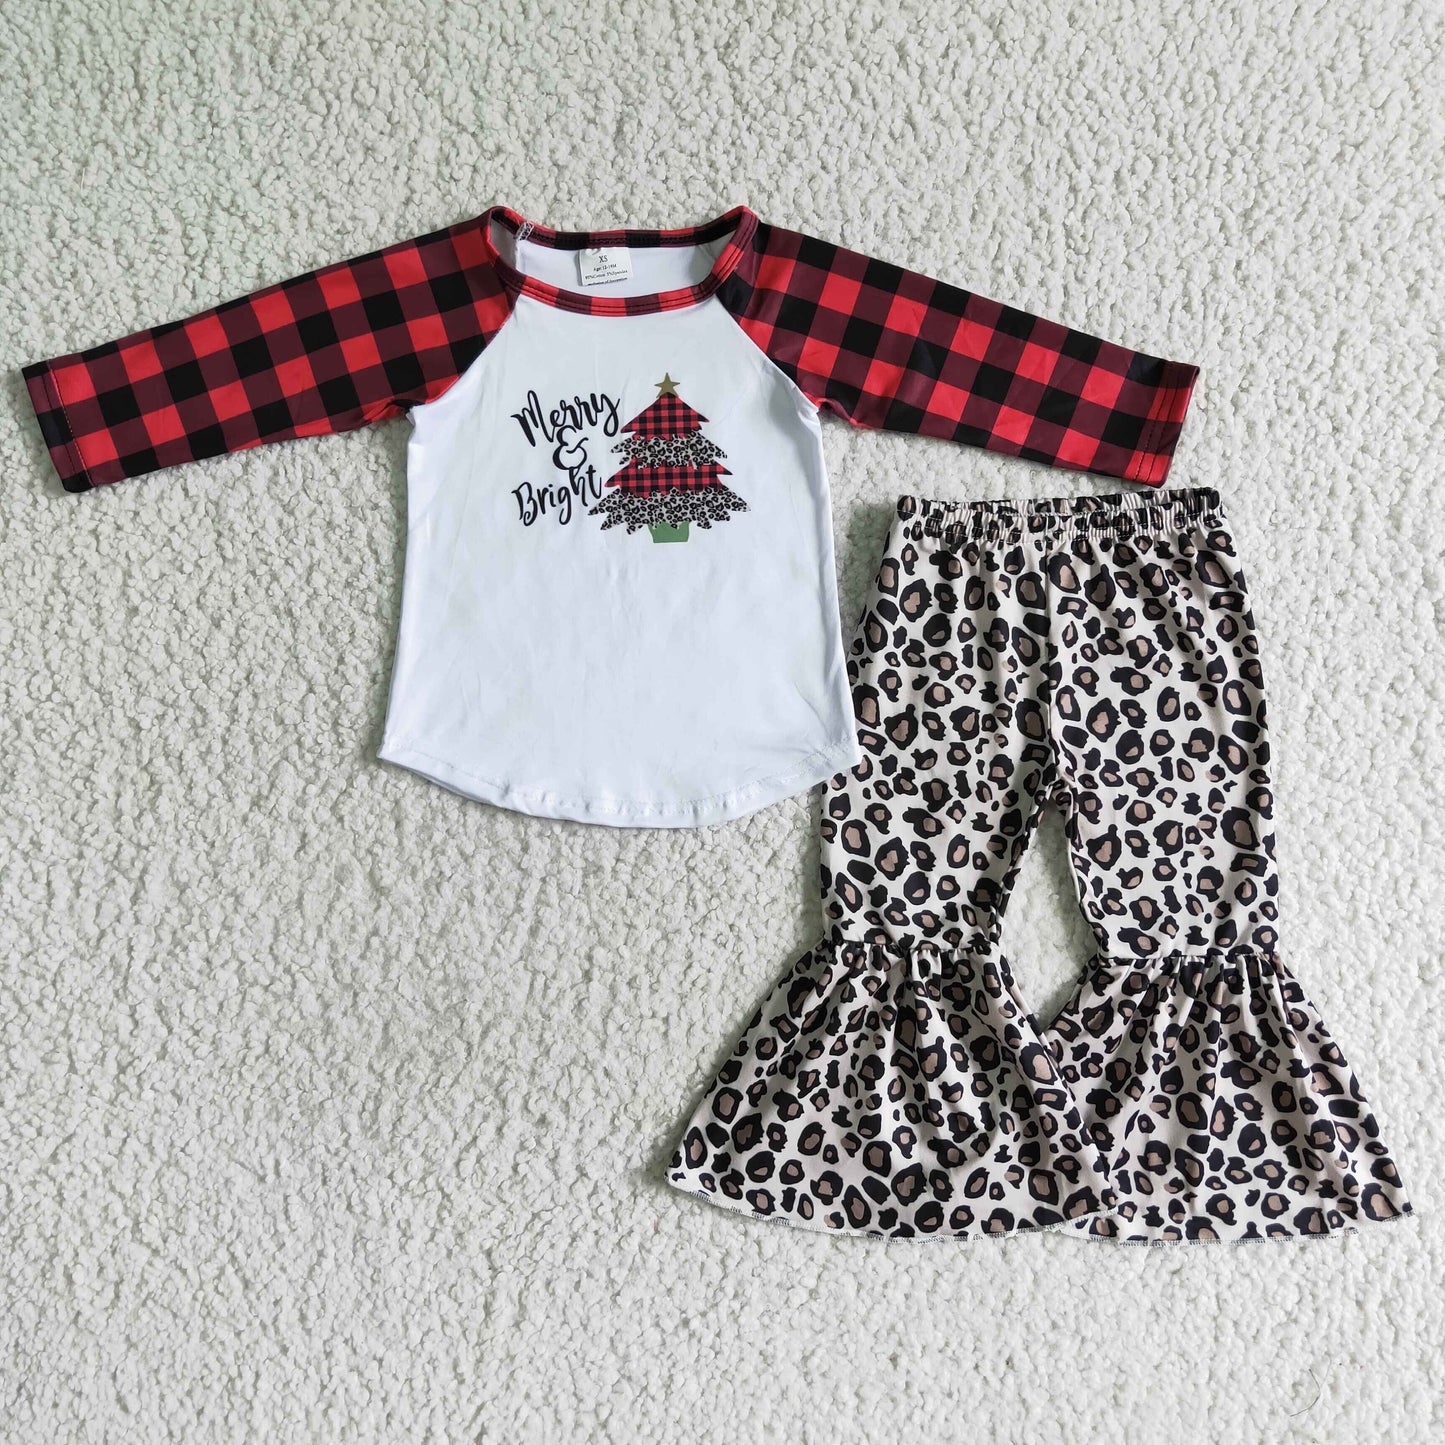 Merry and bright leopard pants children Christmas outfits